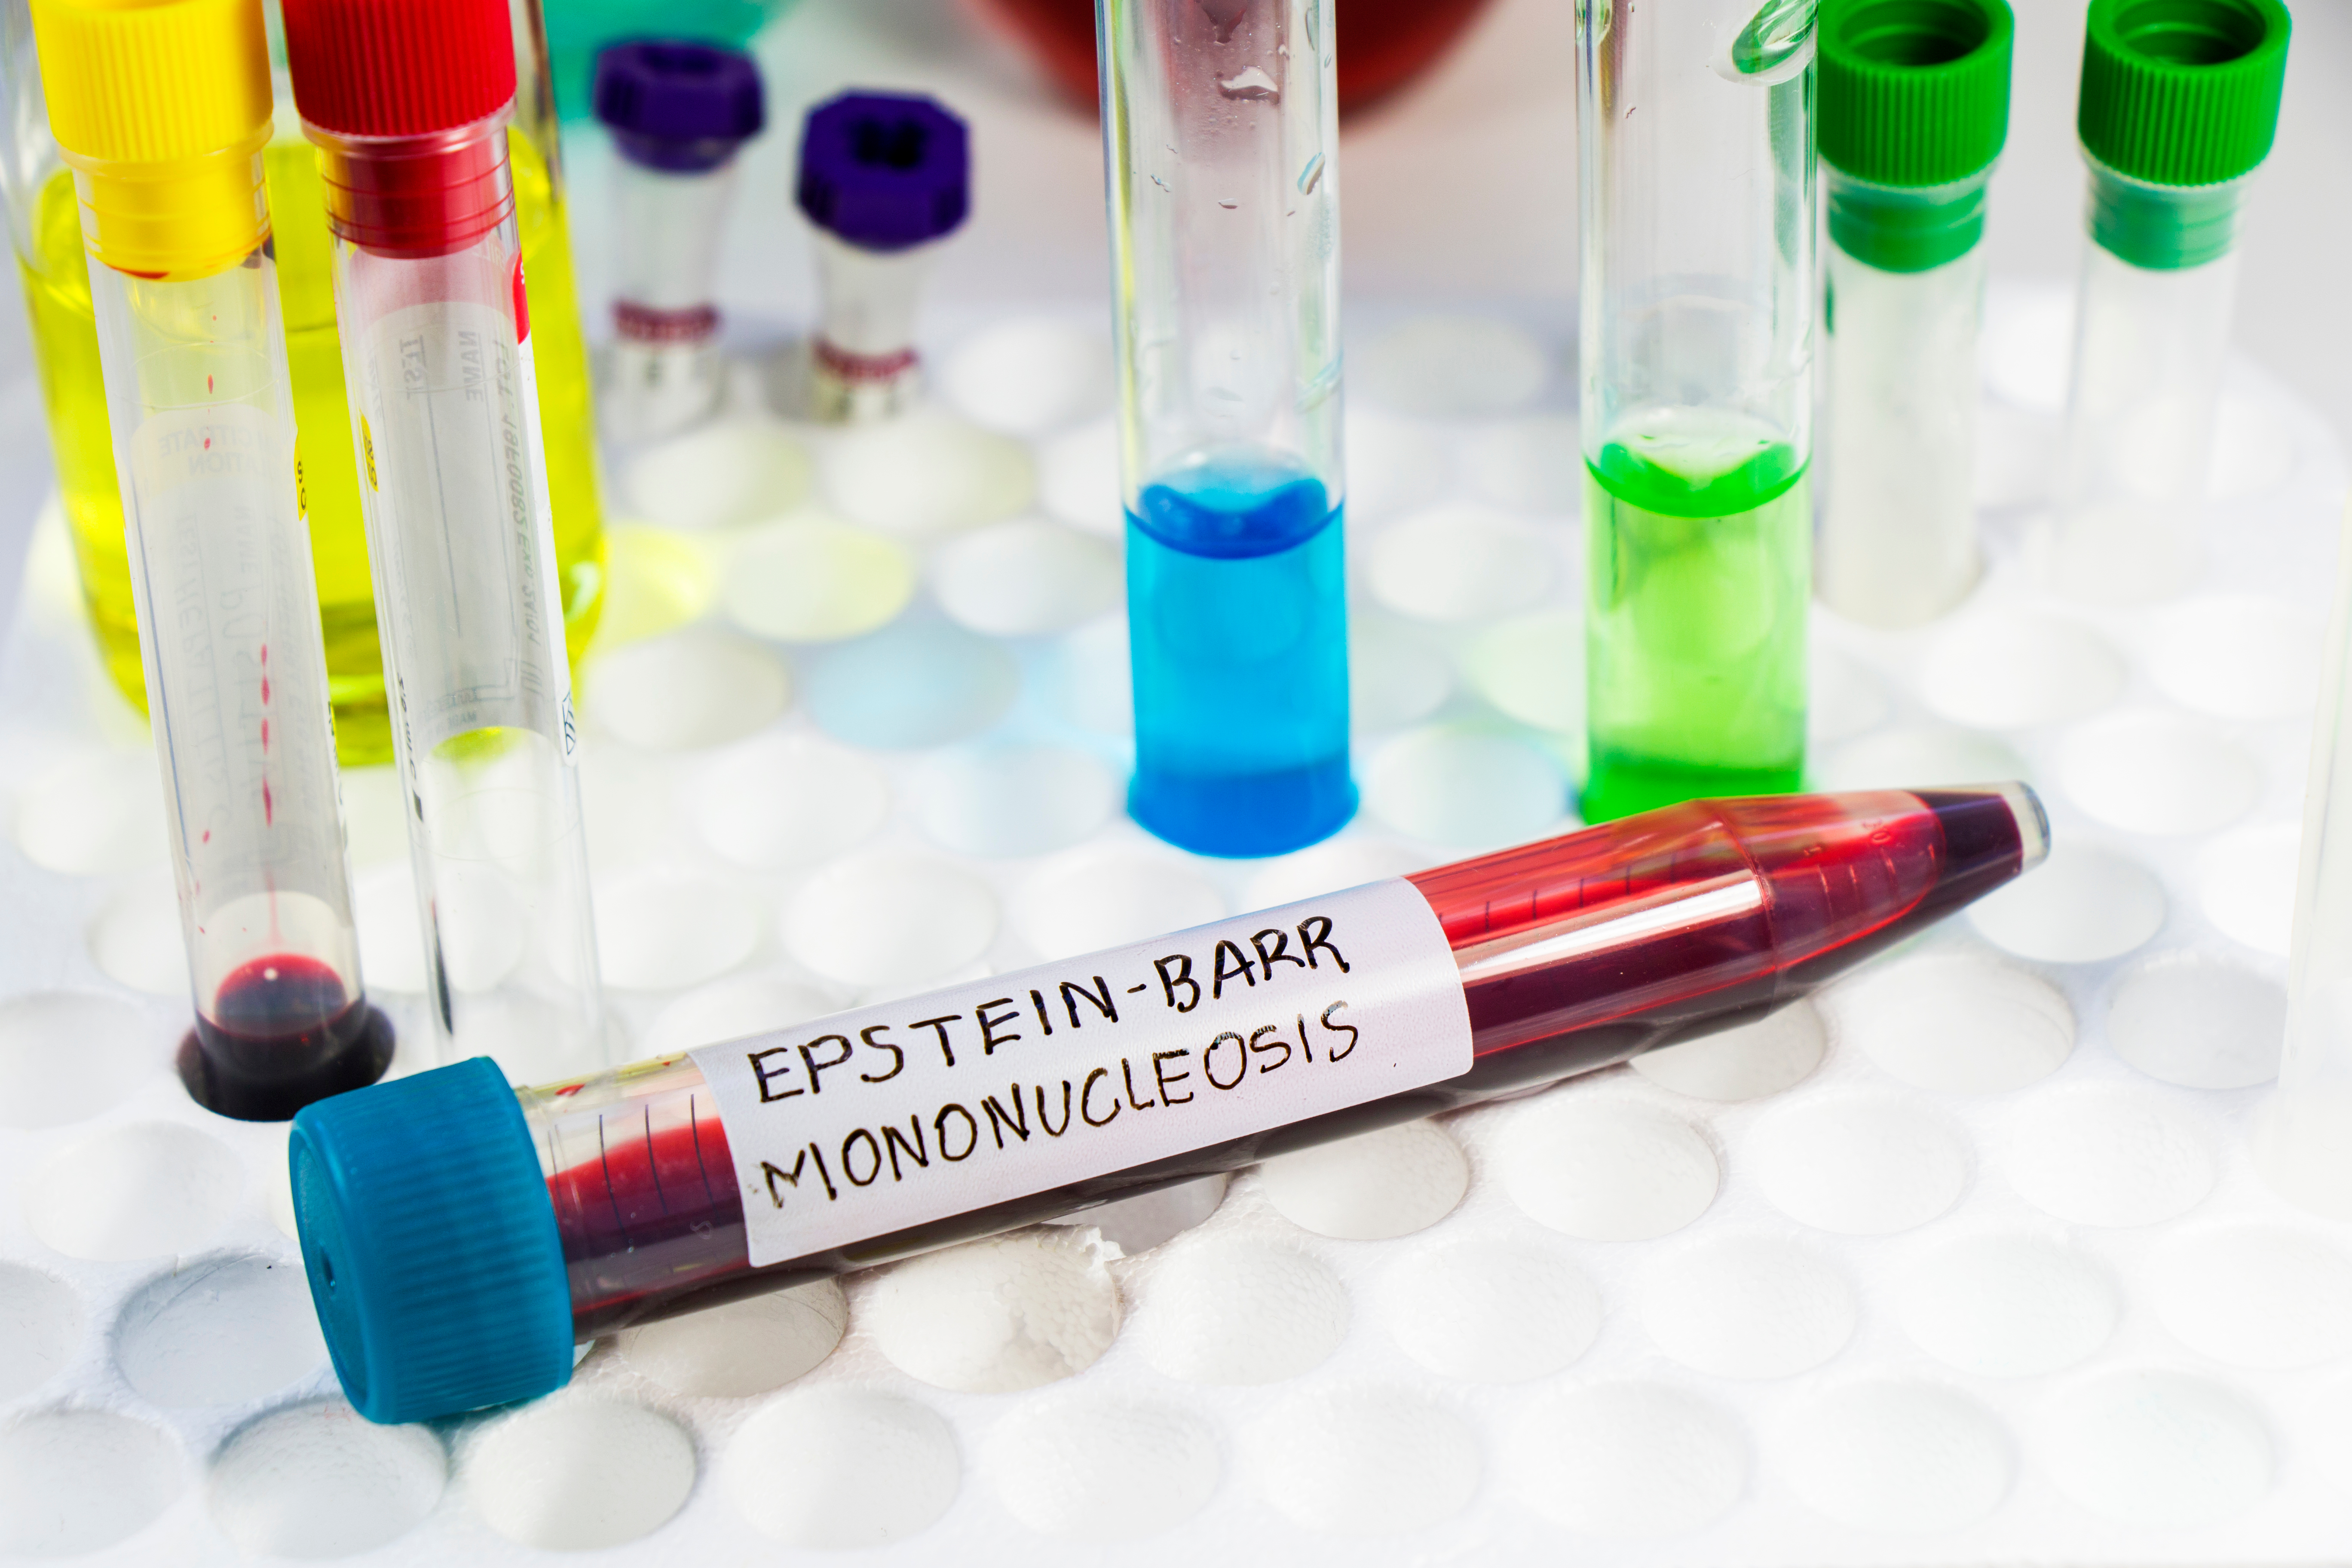 Mononucleosis and Epstein-Barr virus blood test sample in lab.